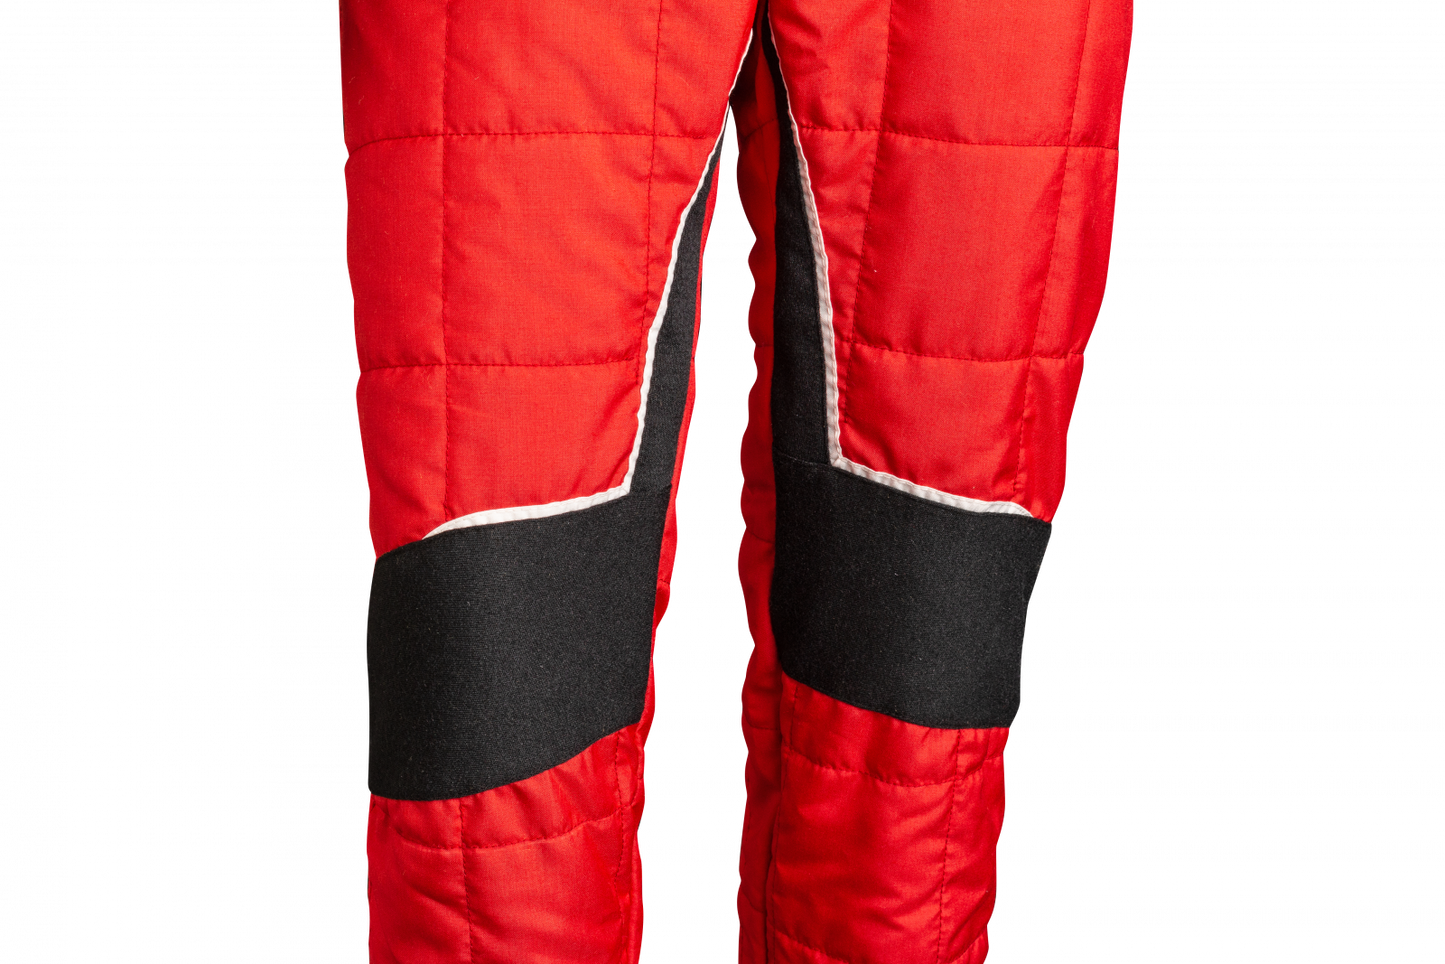 MOMO Corsa Evo Red Size 62 Racing Suit TUCOEVORED62